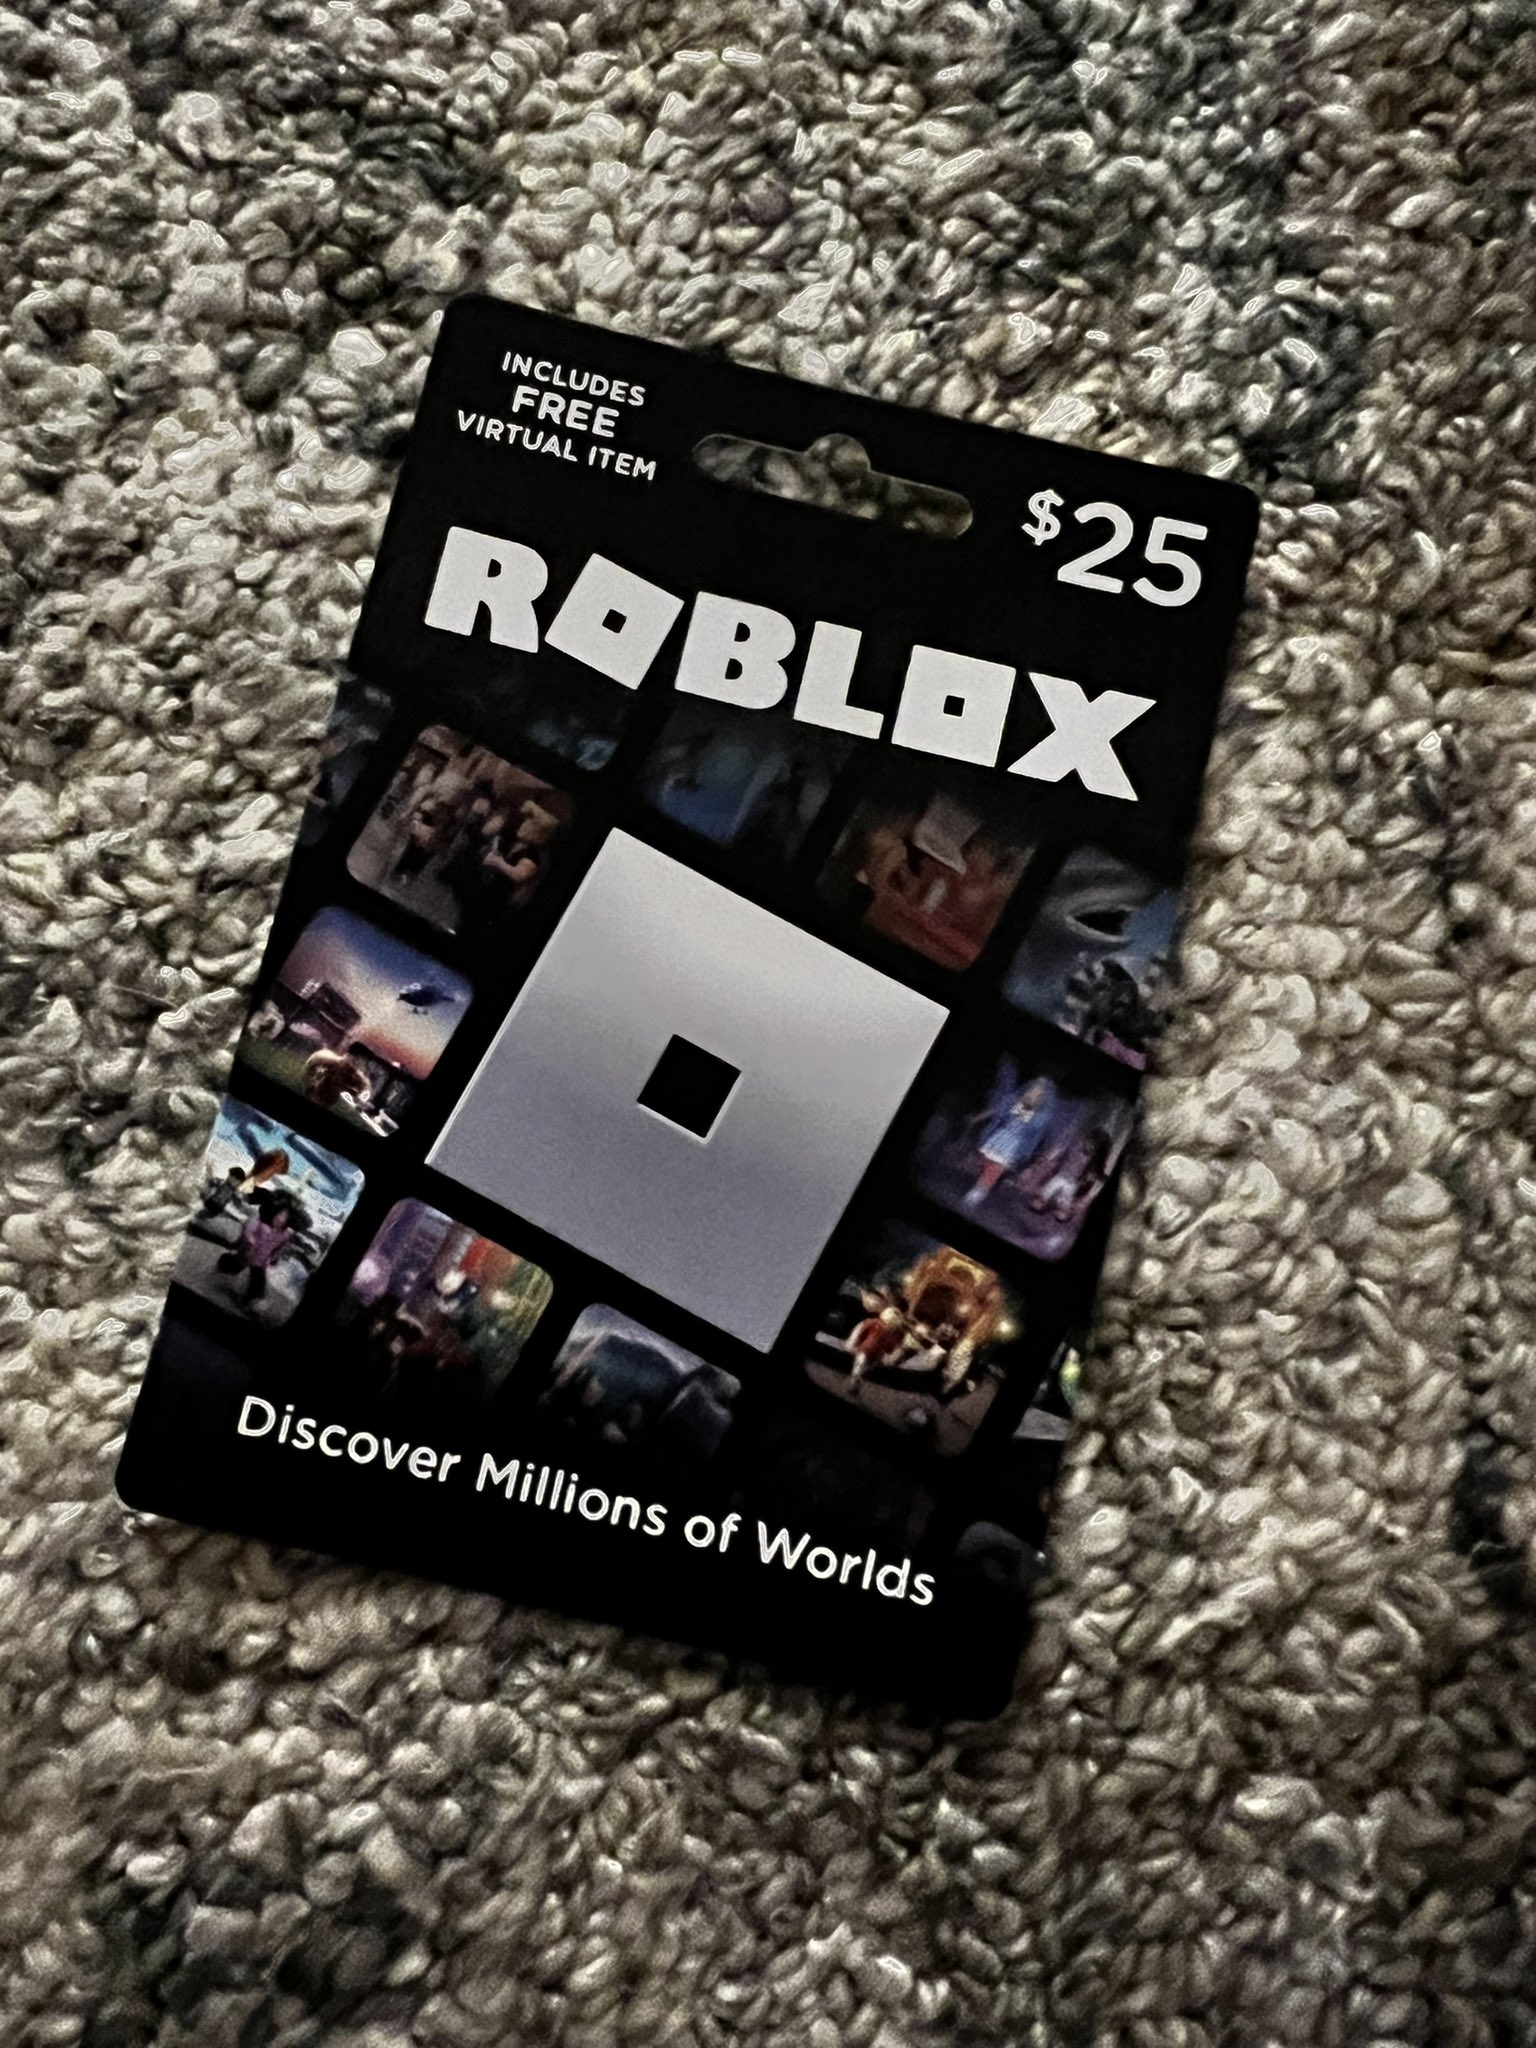 Plebcy on X: [ENDS TODAY] 1,000 Roblox Robux code, Like and Follow to win!   / X